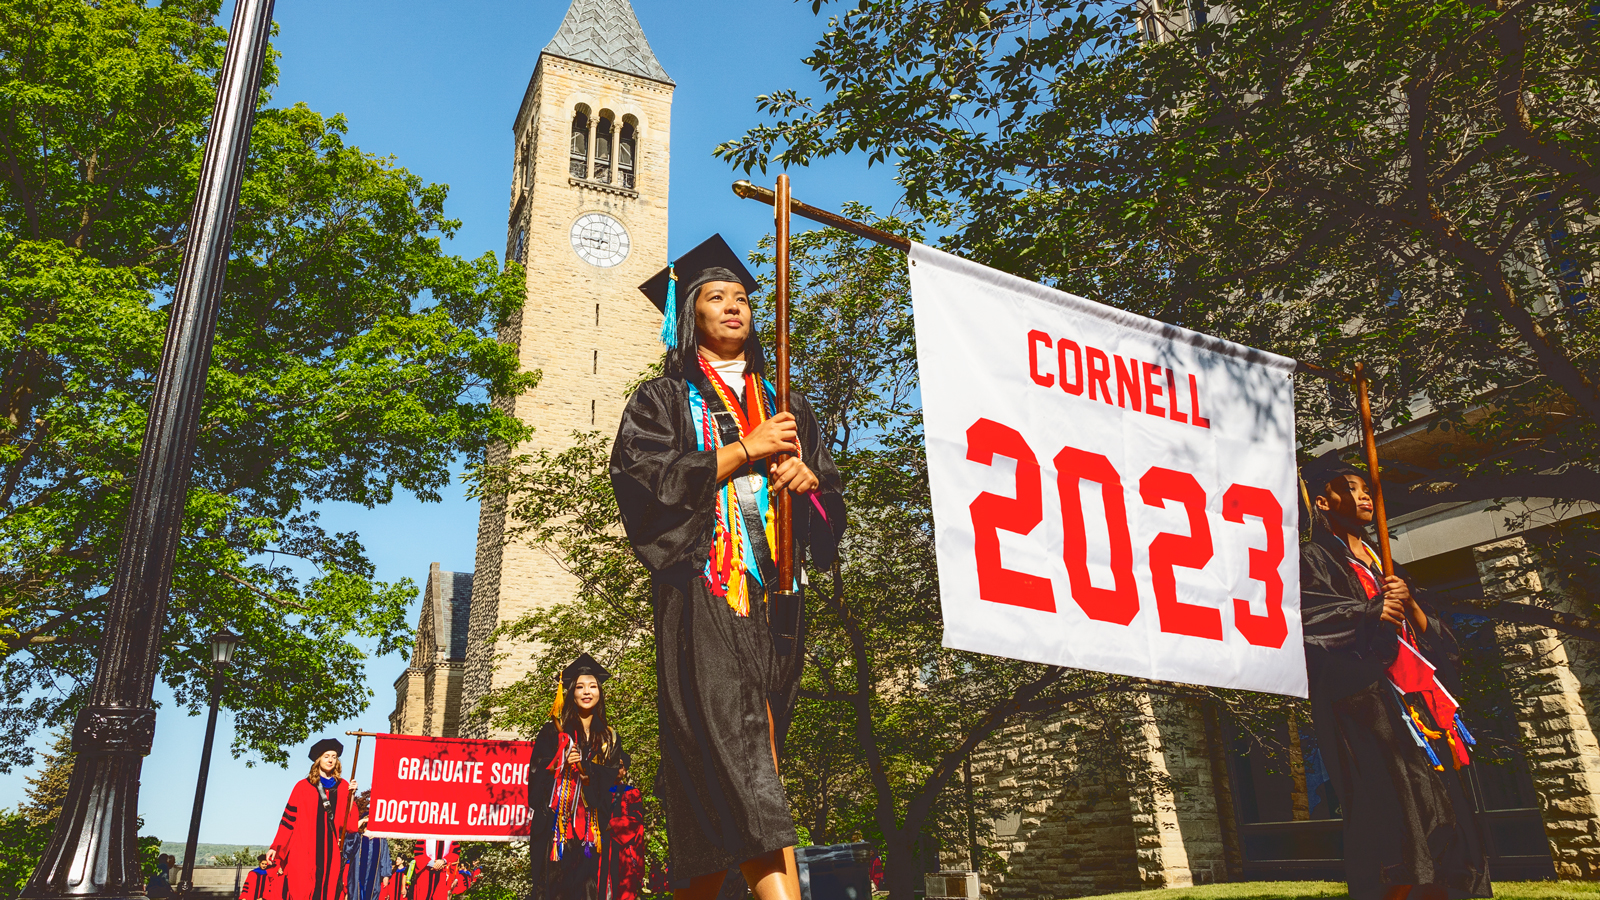 The front of the academic procession passes McGraw Tower during Commencement 2023